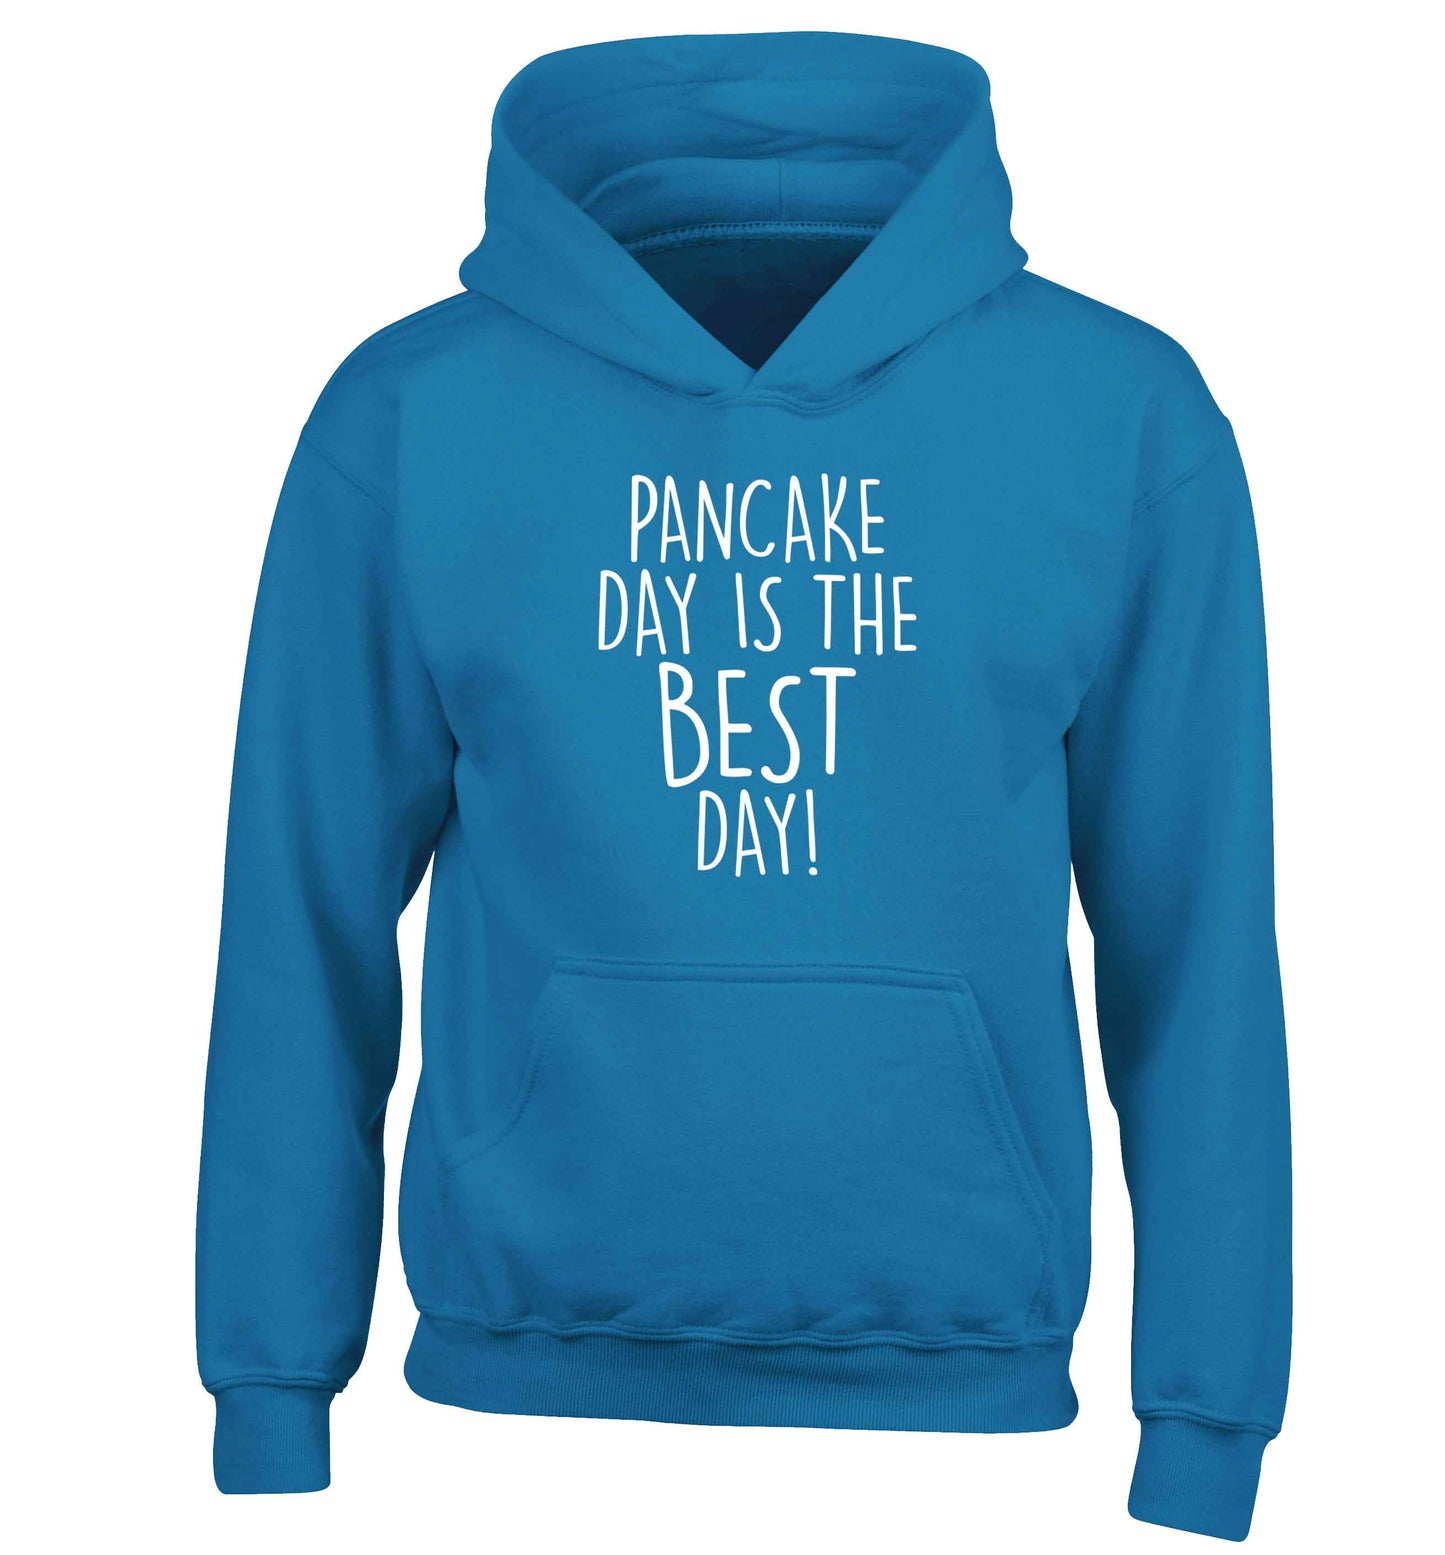 Pancake day is the best day children's blue hoodie 12-13 Years